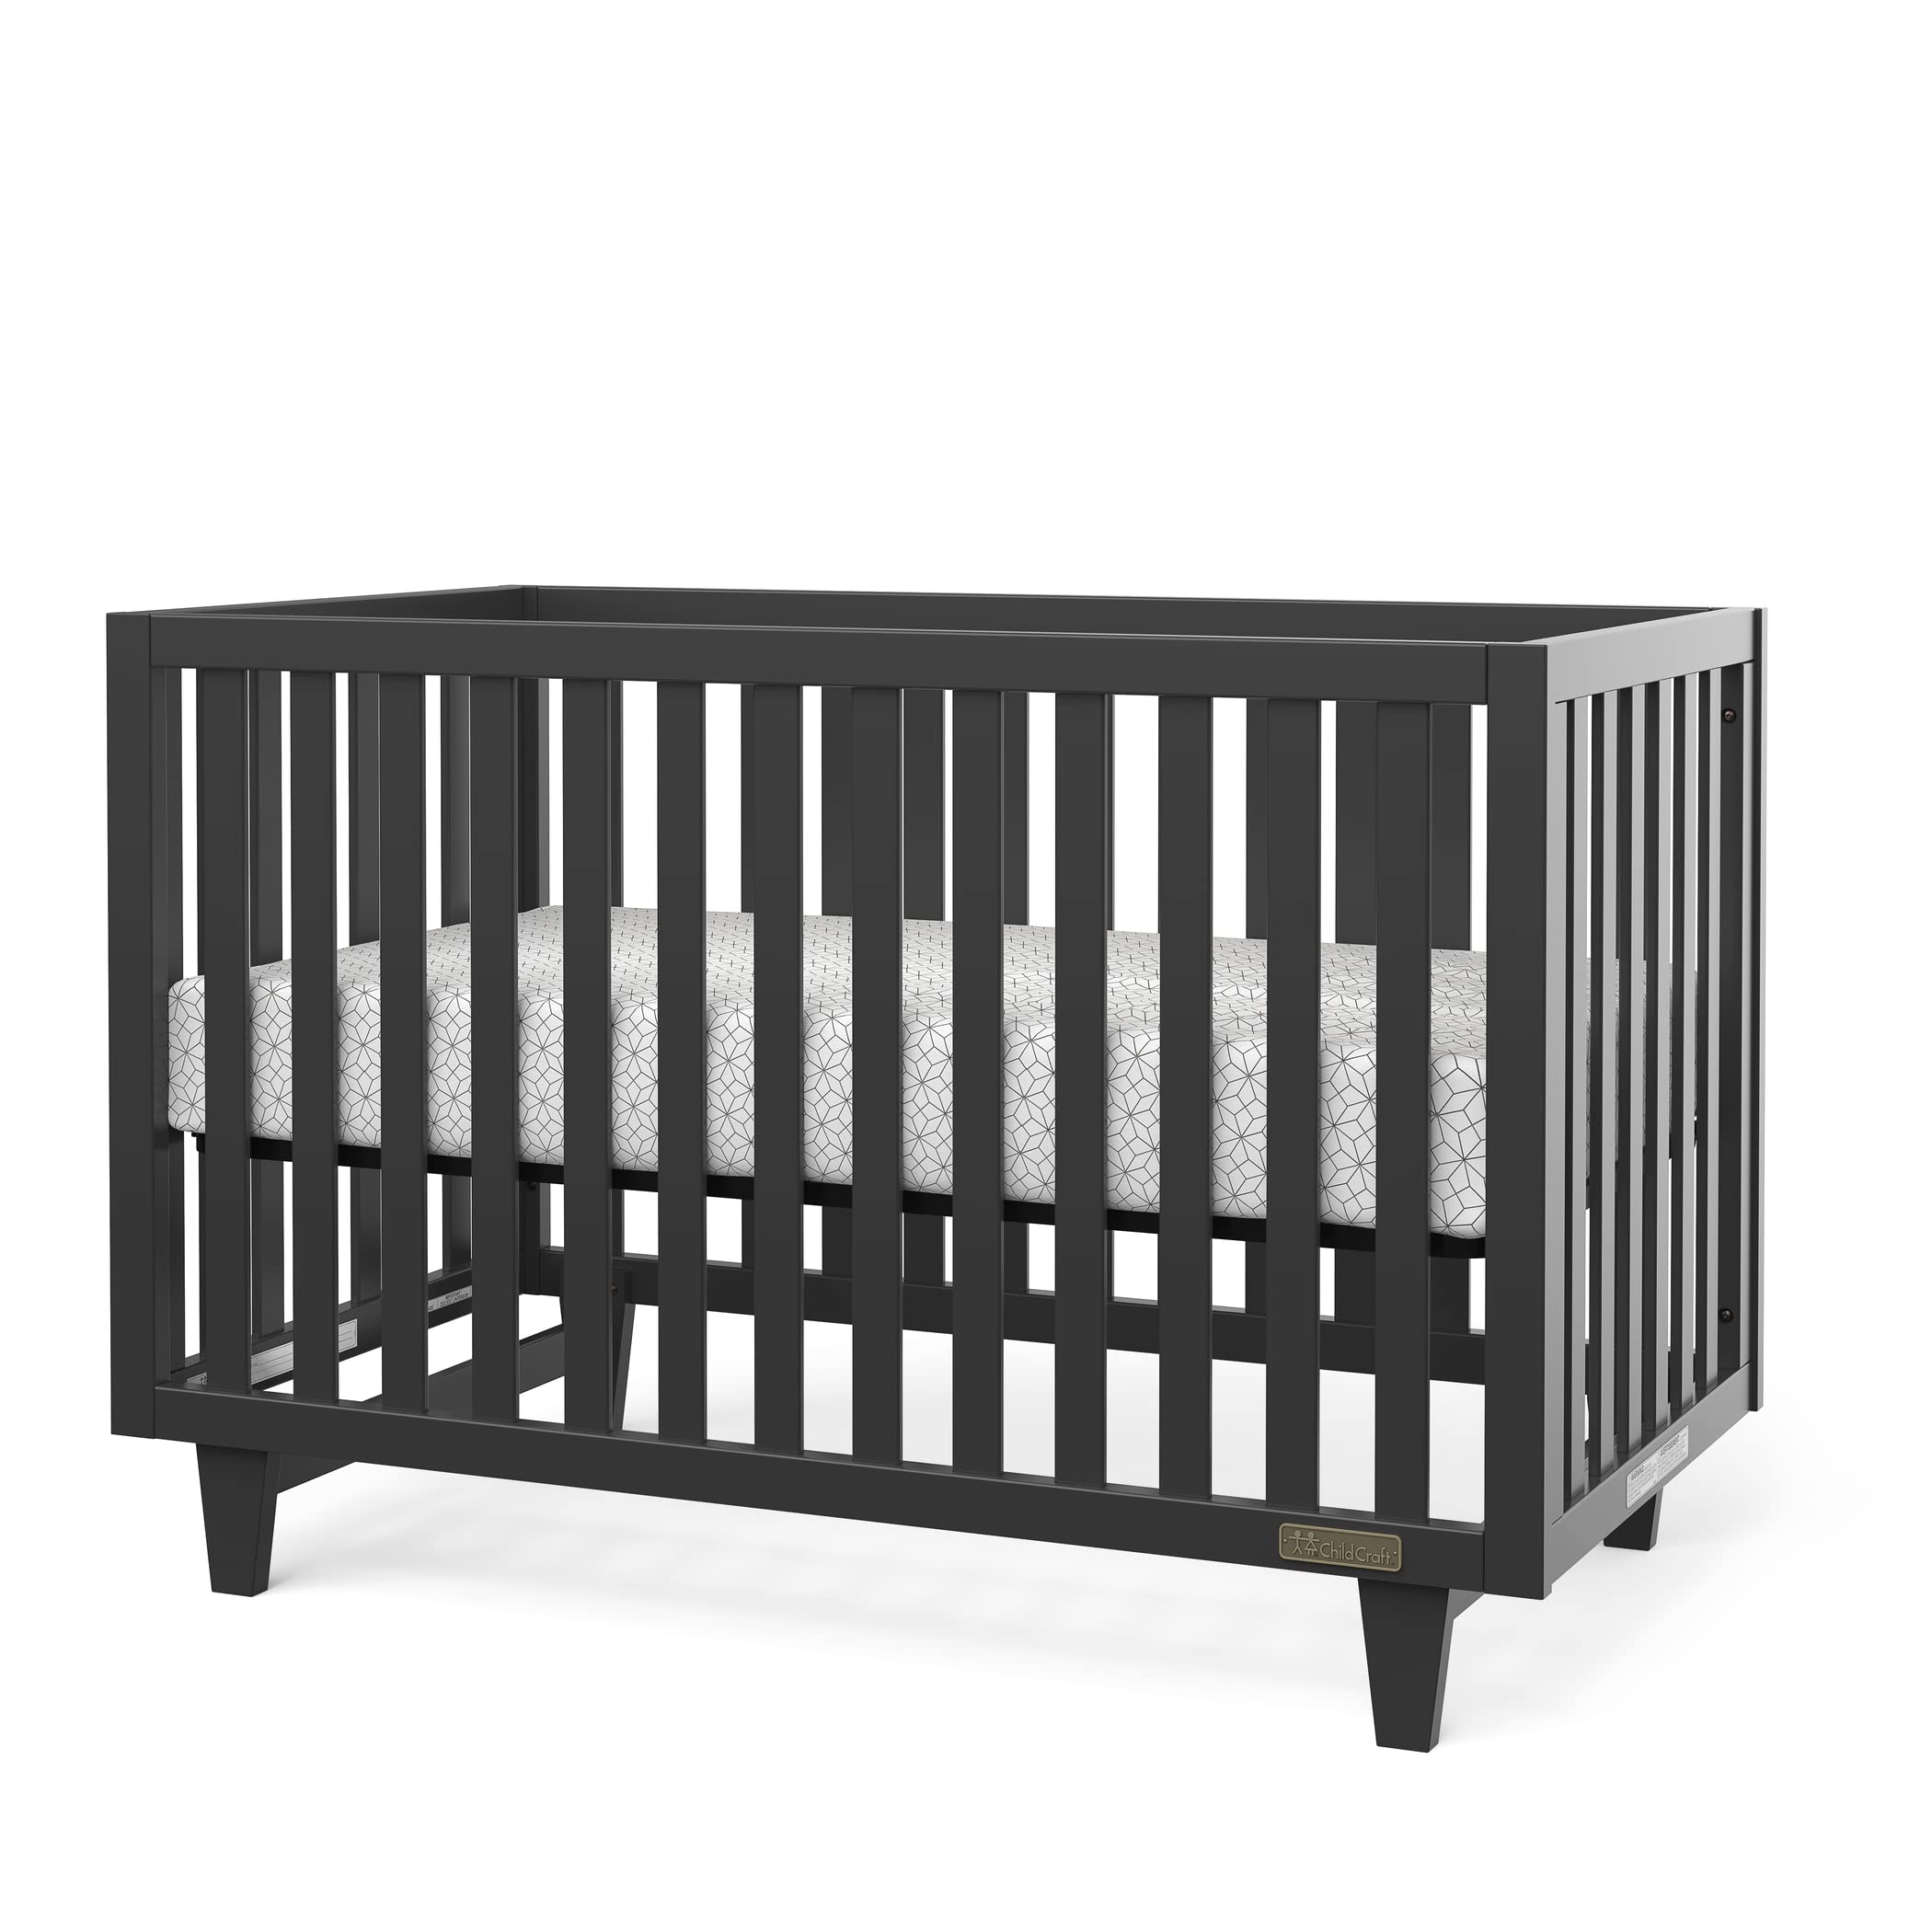 Child Craft Tremont 2 Piece Baby Nursery Set with 4 in 1 Convertible Crib and Changing Table Dresser (Ebony Black)